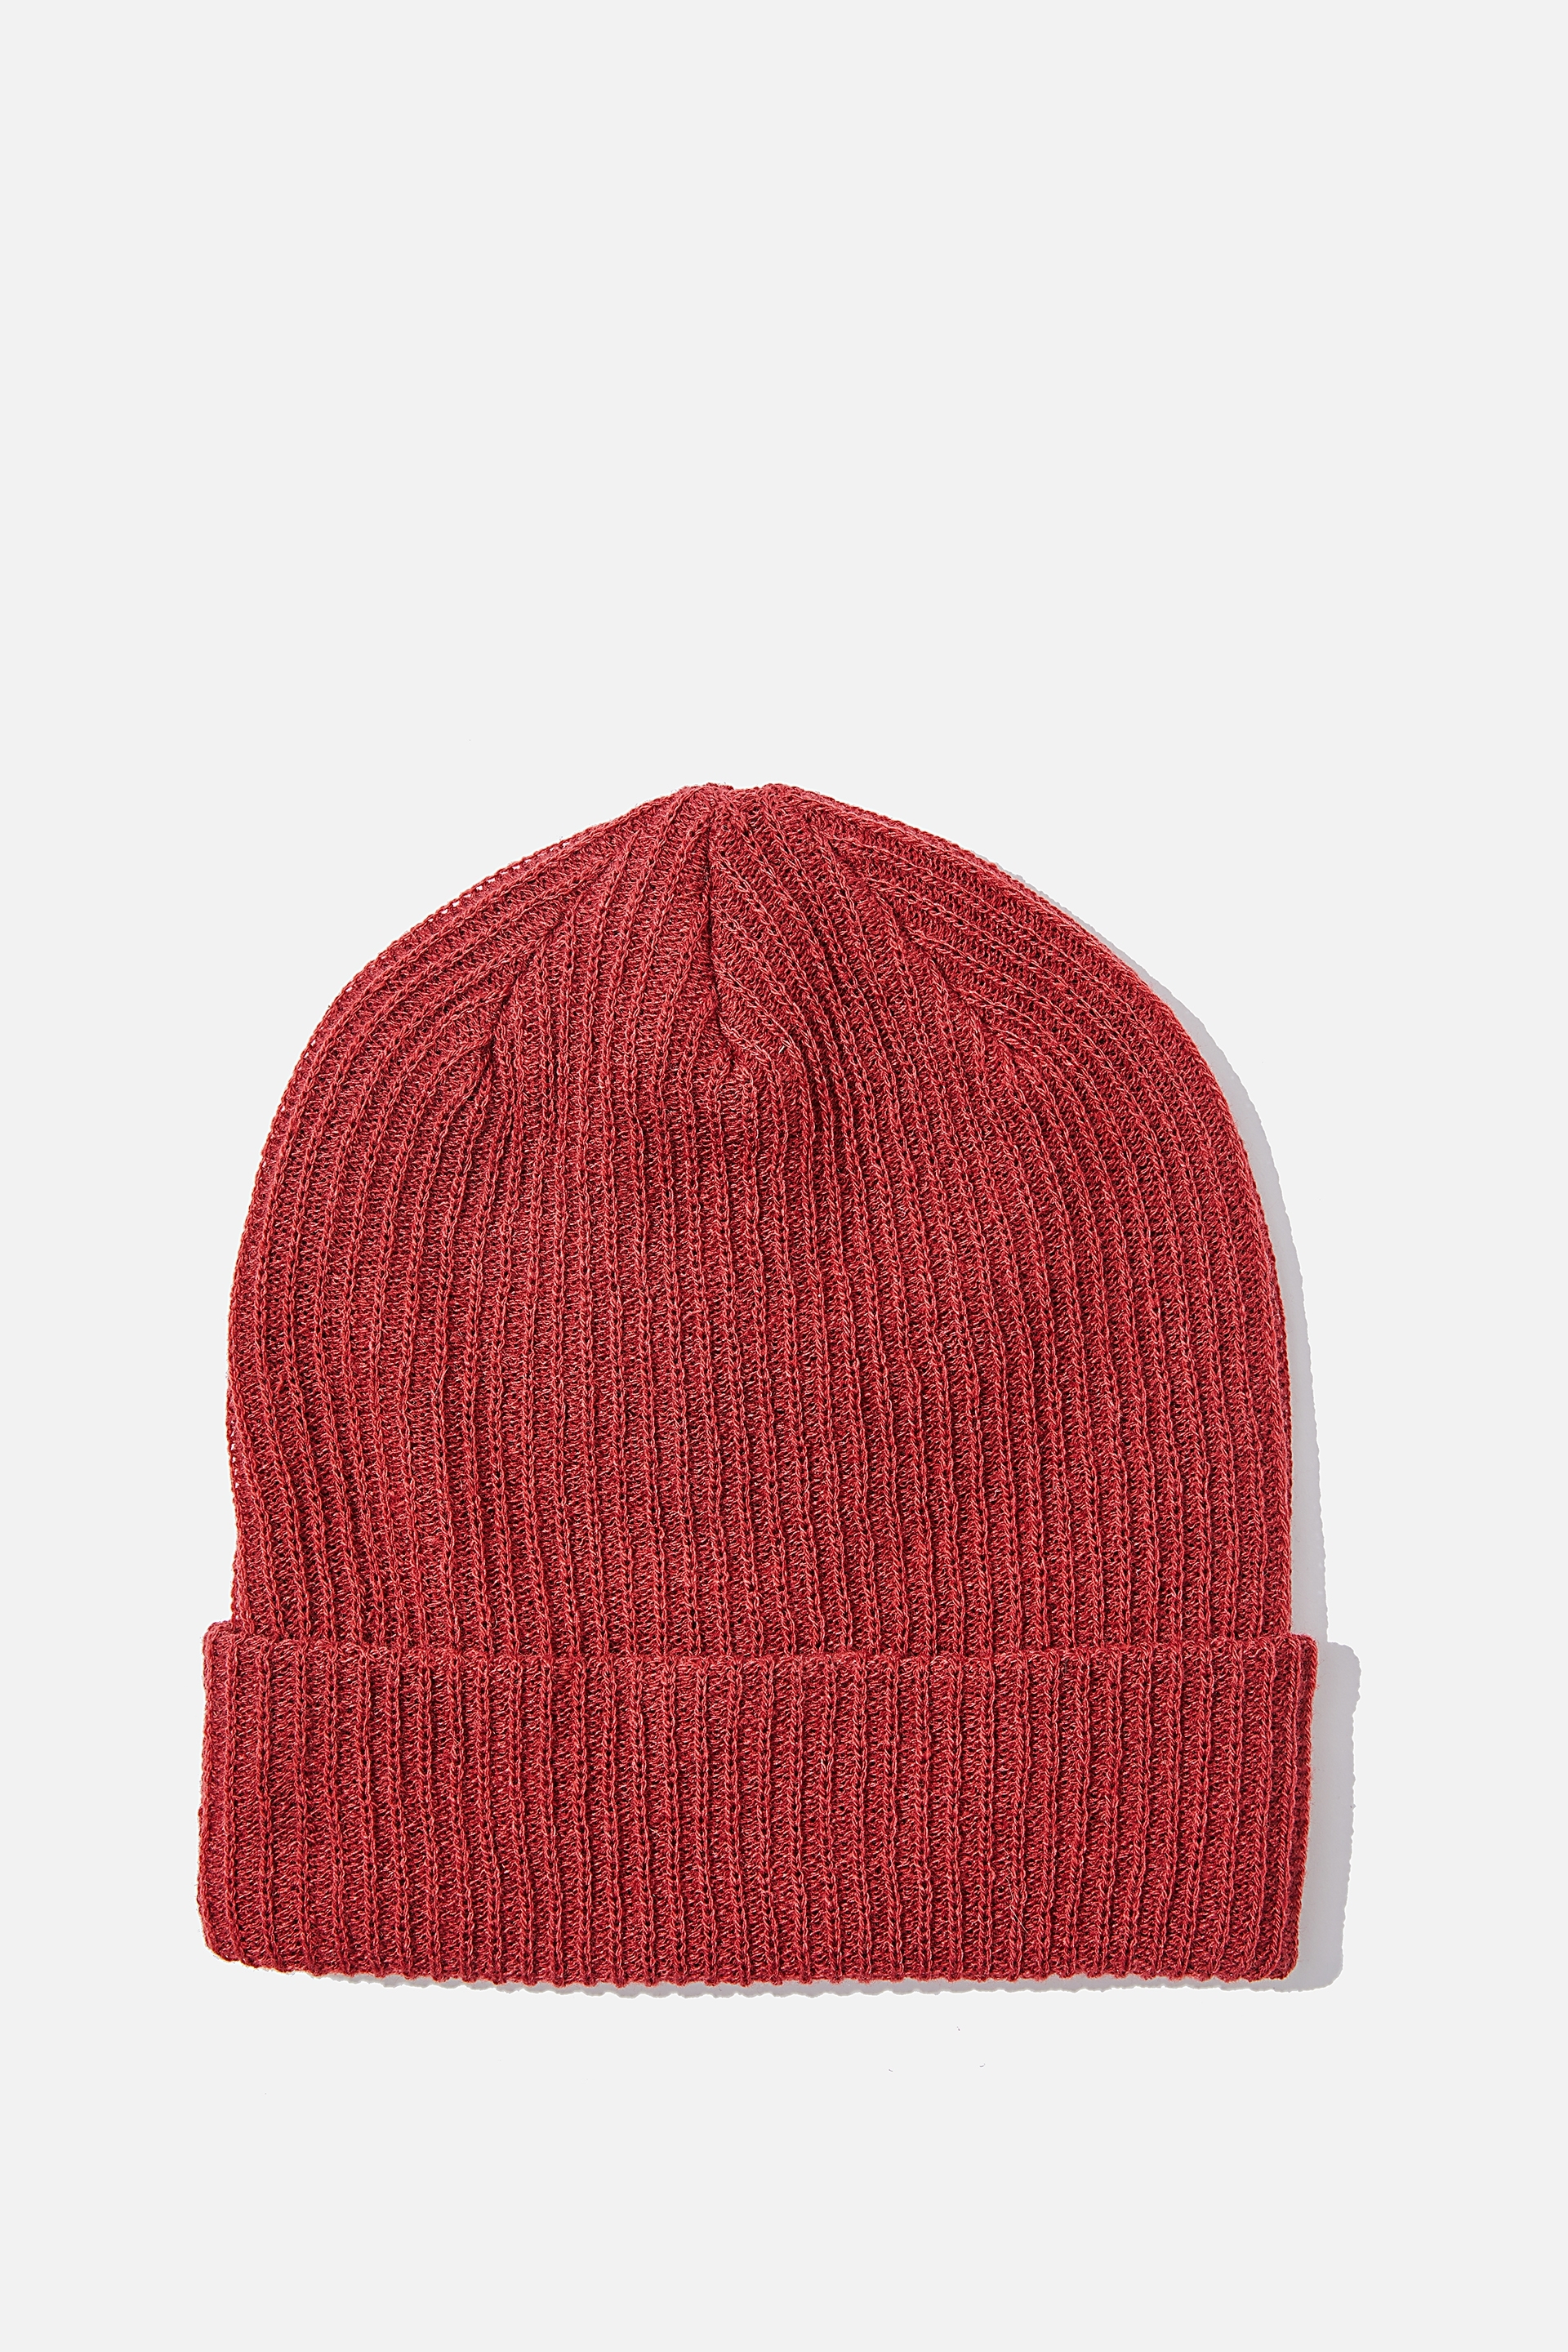 Cotton On Men - Ribbed Beanie - Vintage red